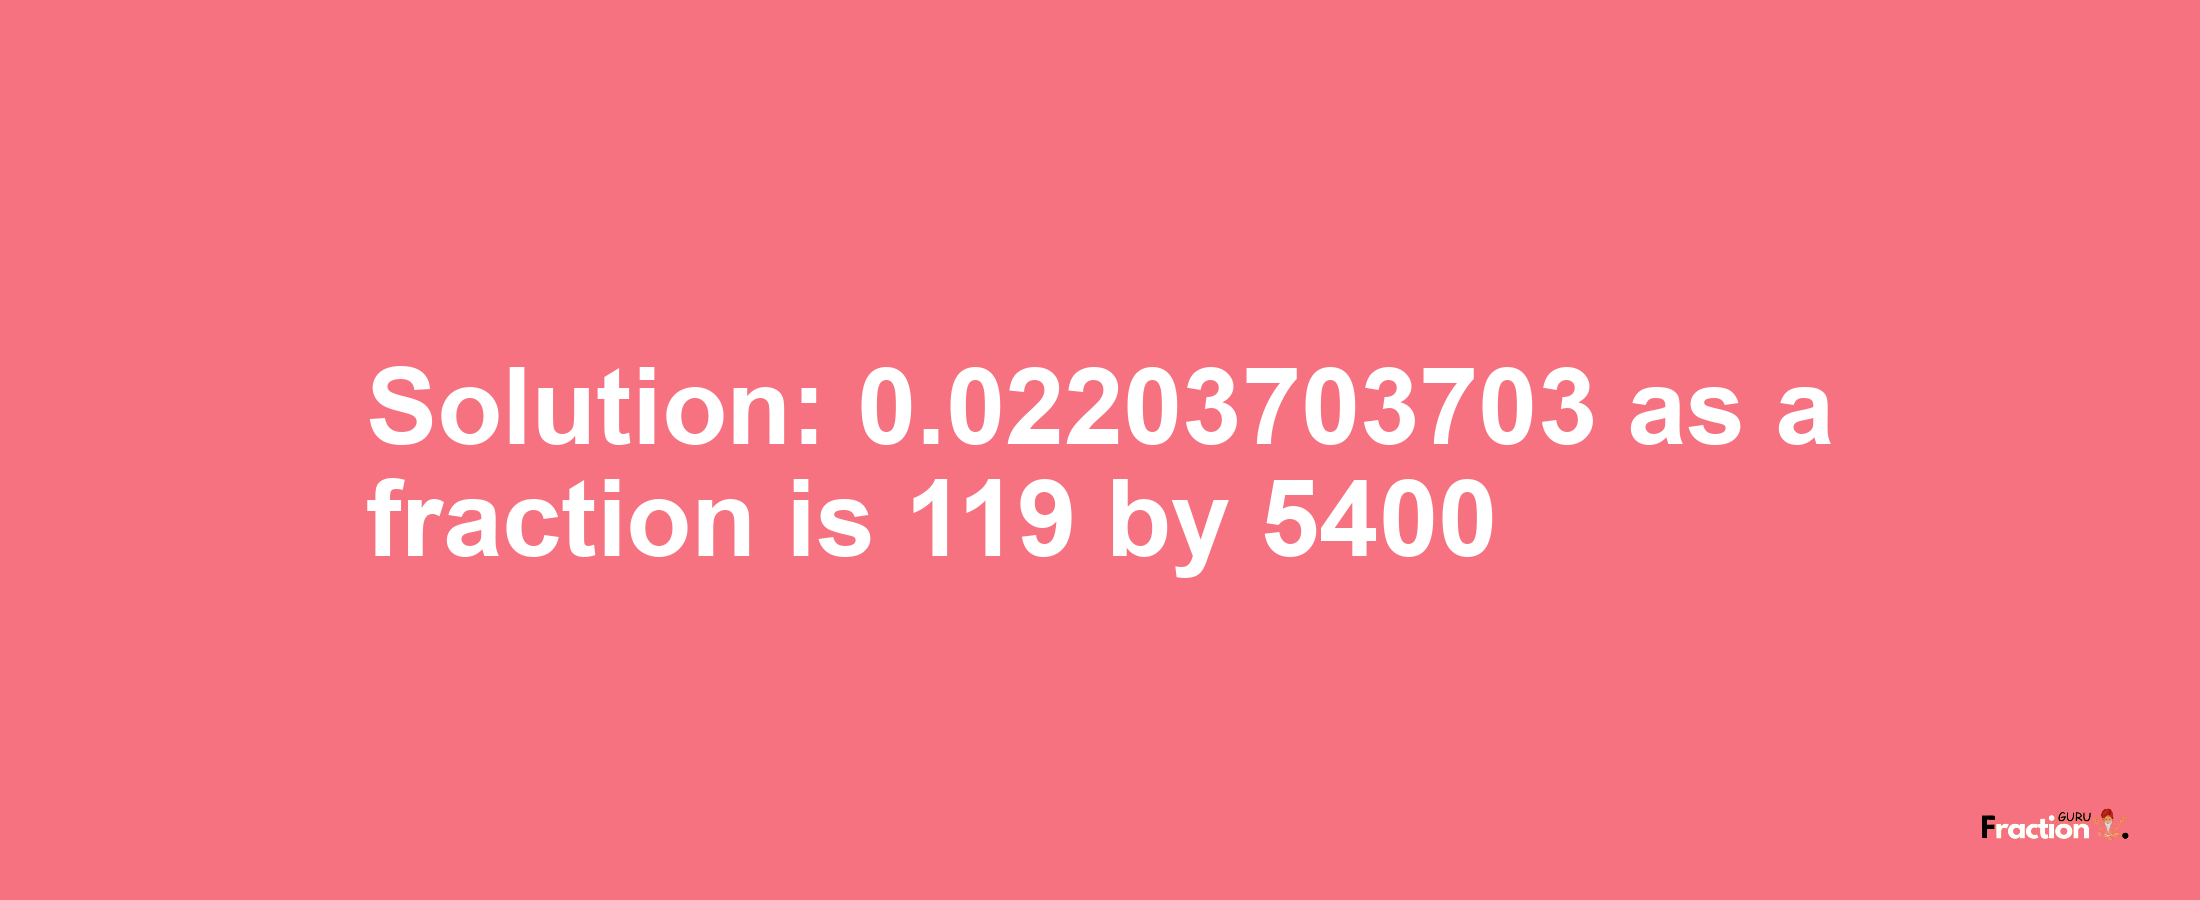 Solution:0.02203703703 as a fraction is 119/5400